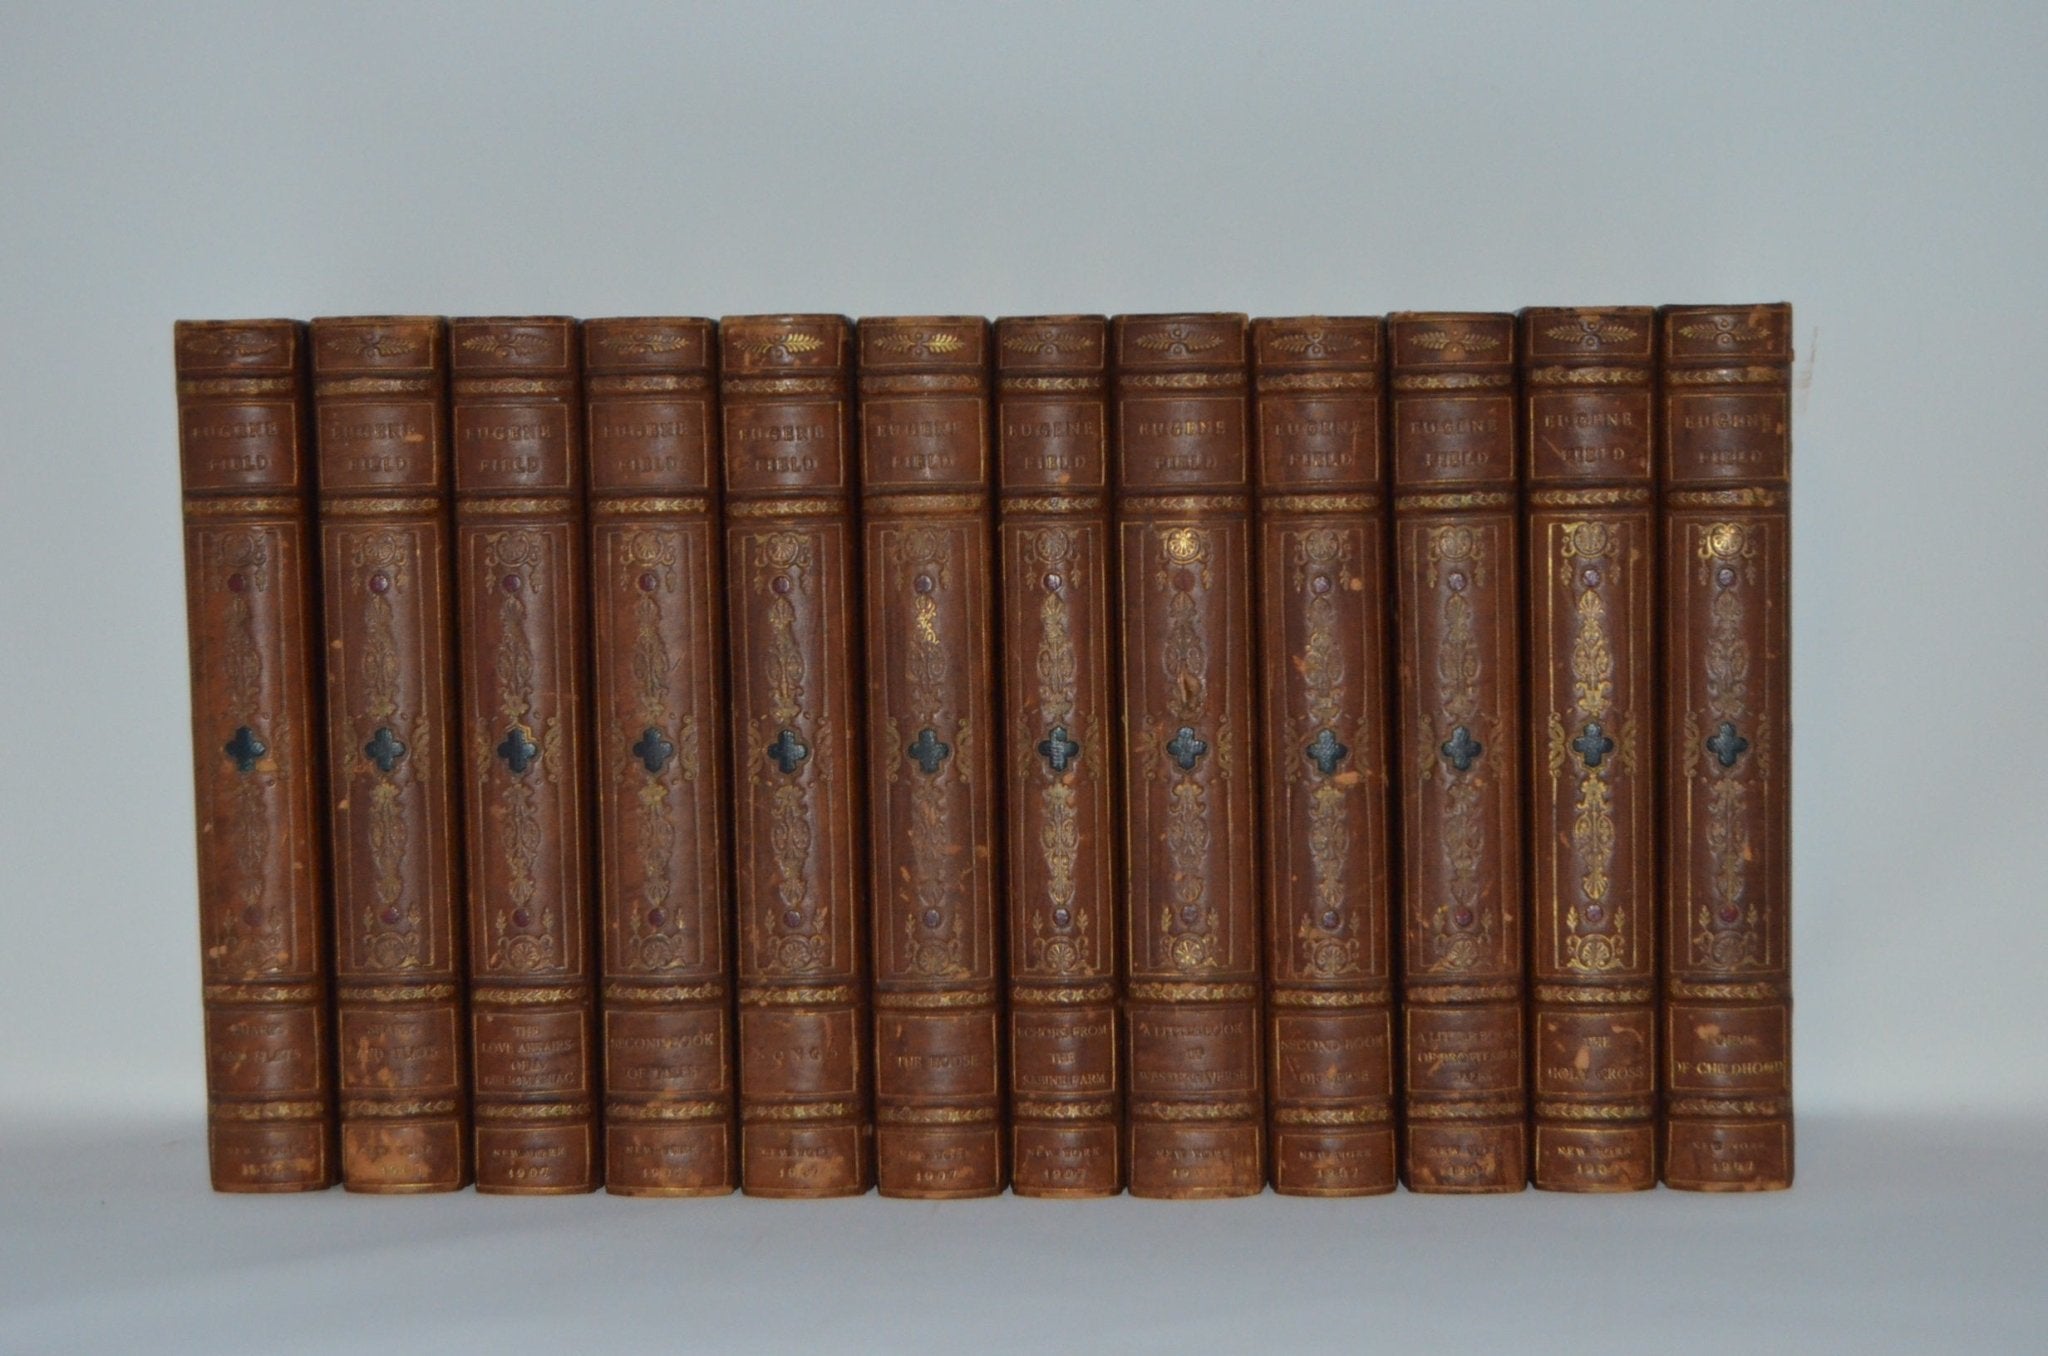 Complete Works of Eugene Field in 12 Volumes – Charles Scribner’s Sons 1905-1907 - Brookfield Books